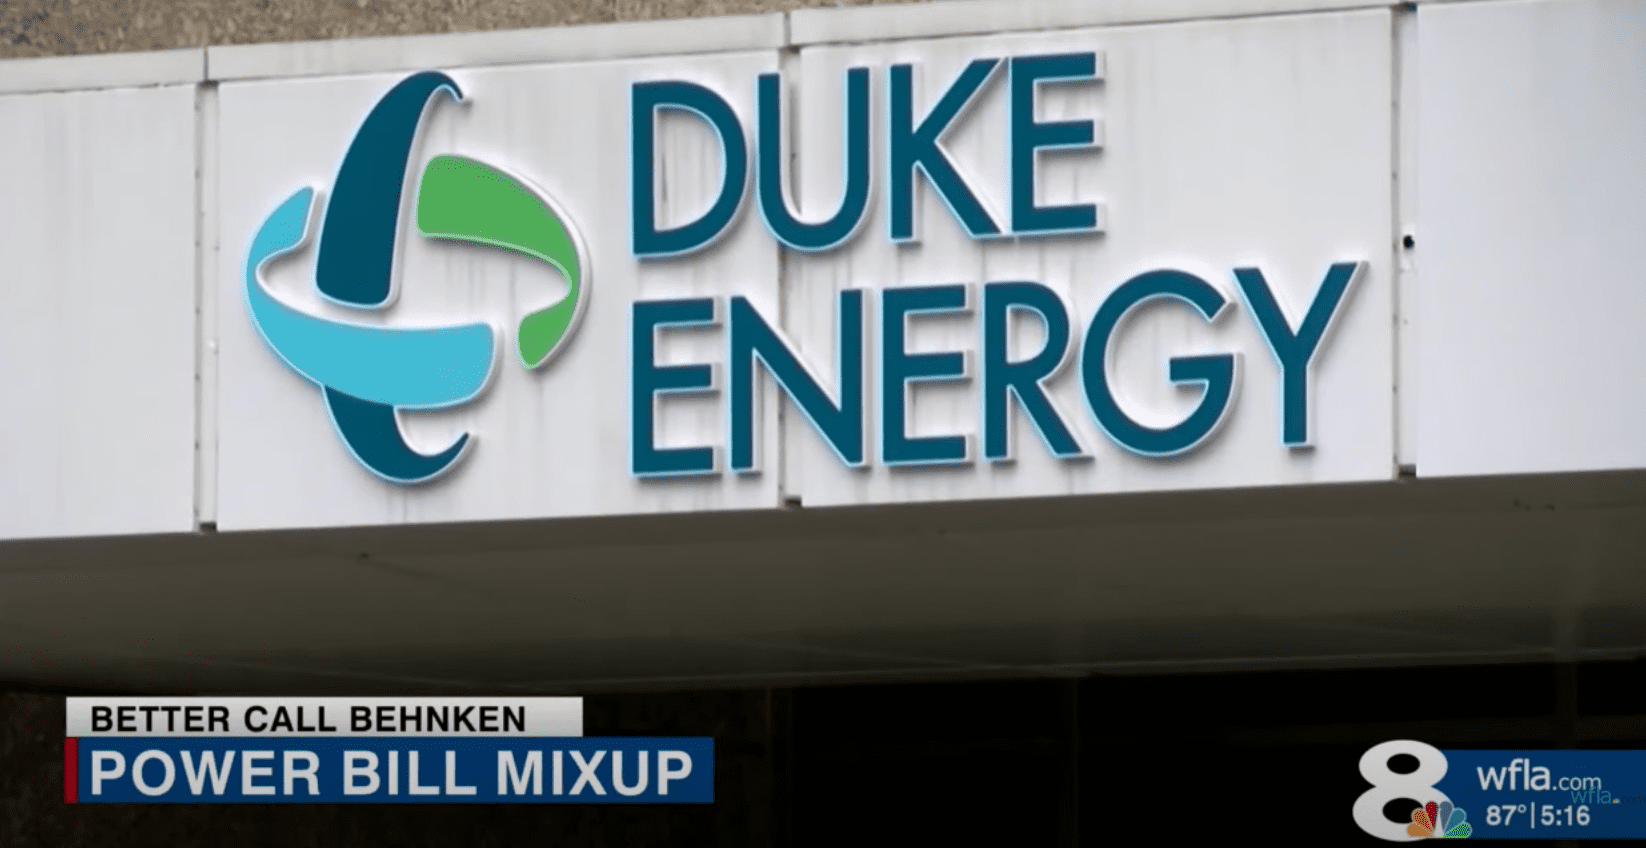 The exterior of the Duke Energy building, the company who is accused of charging a woman's account incorrectly | Photo: Youtube/WFLA News Channel 8